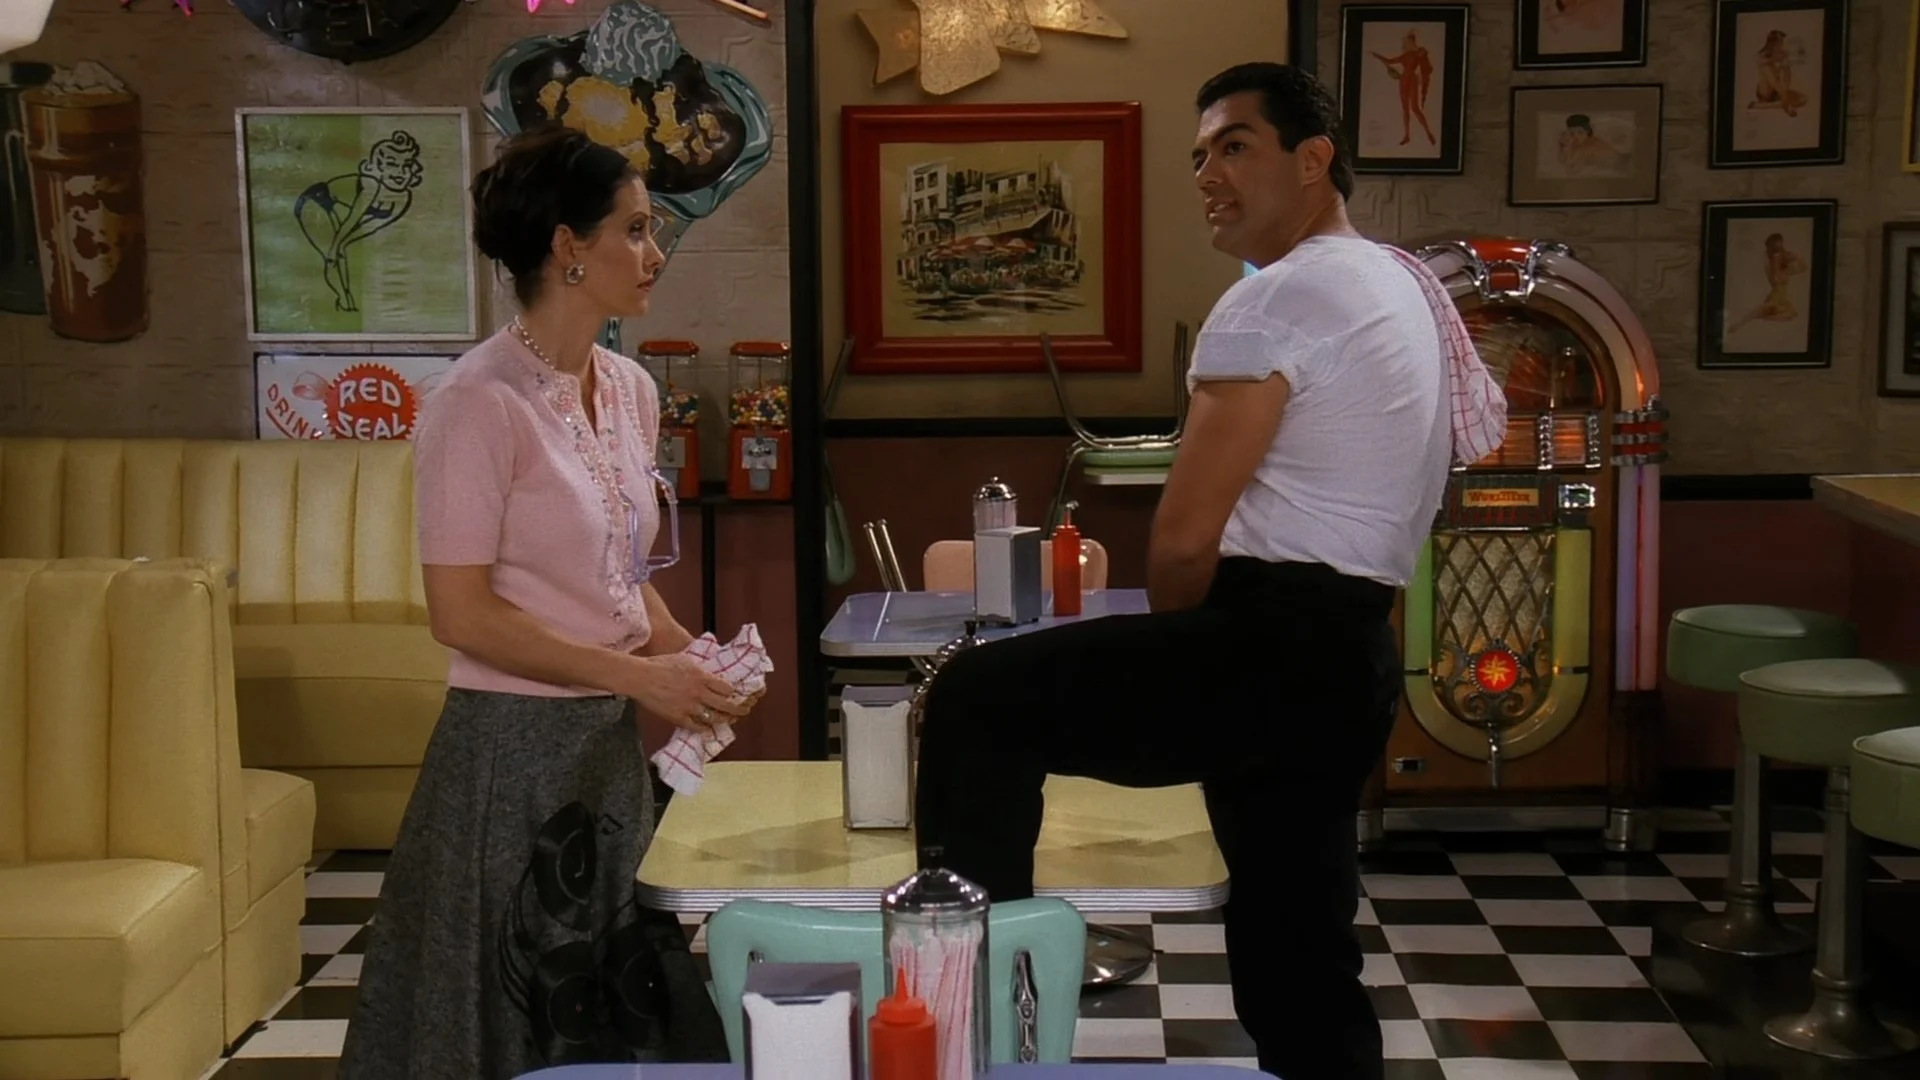 Second Look: Friends Season 3 Episode 12 – “The One with All the Jealousy”